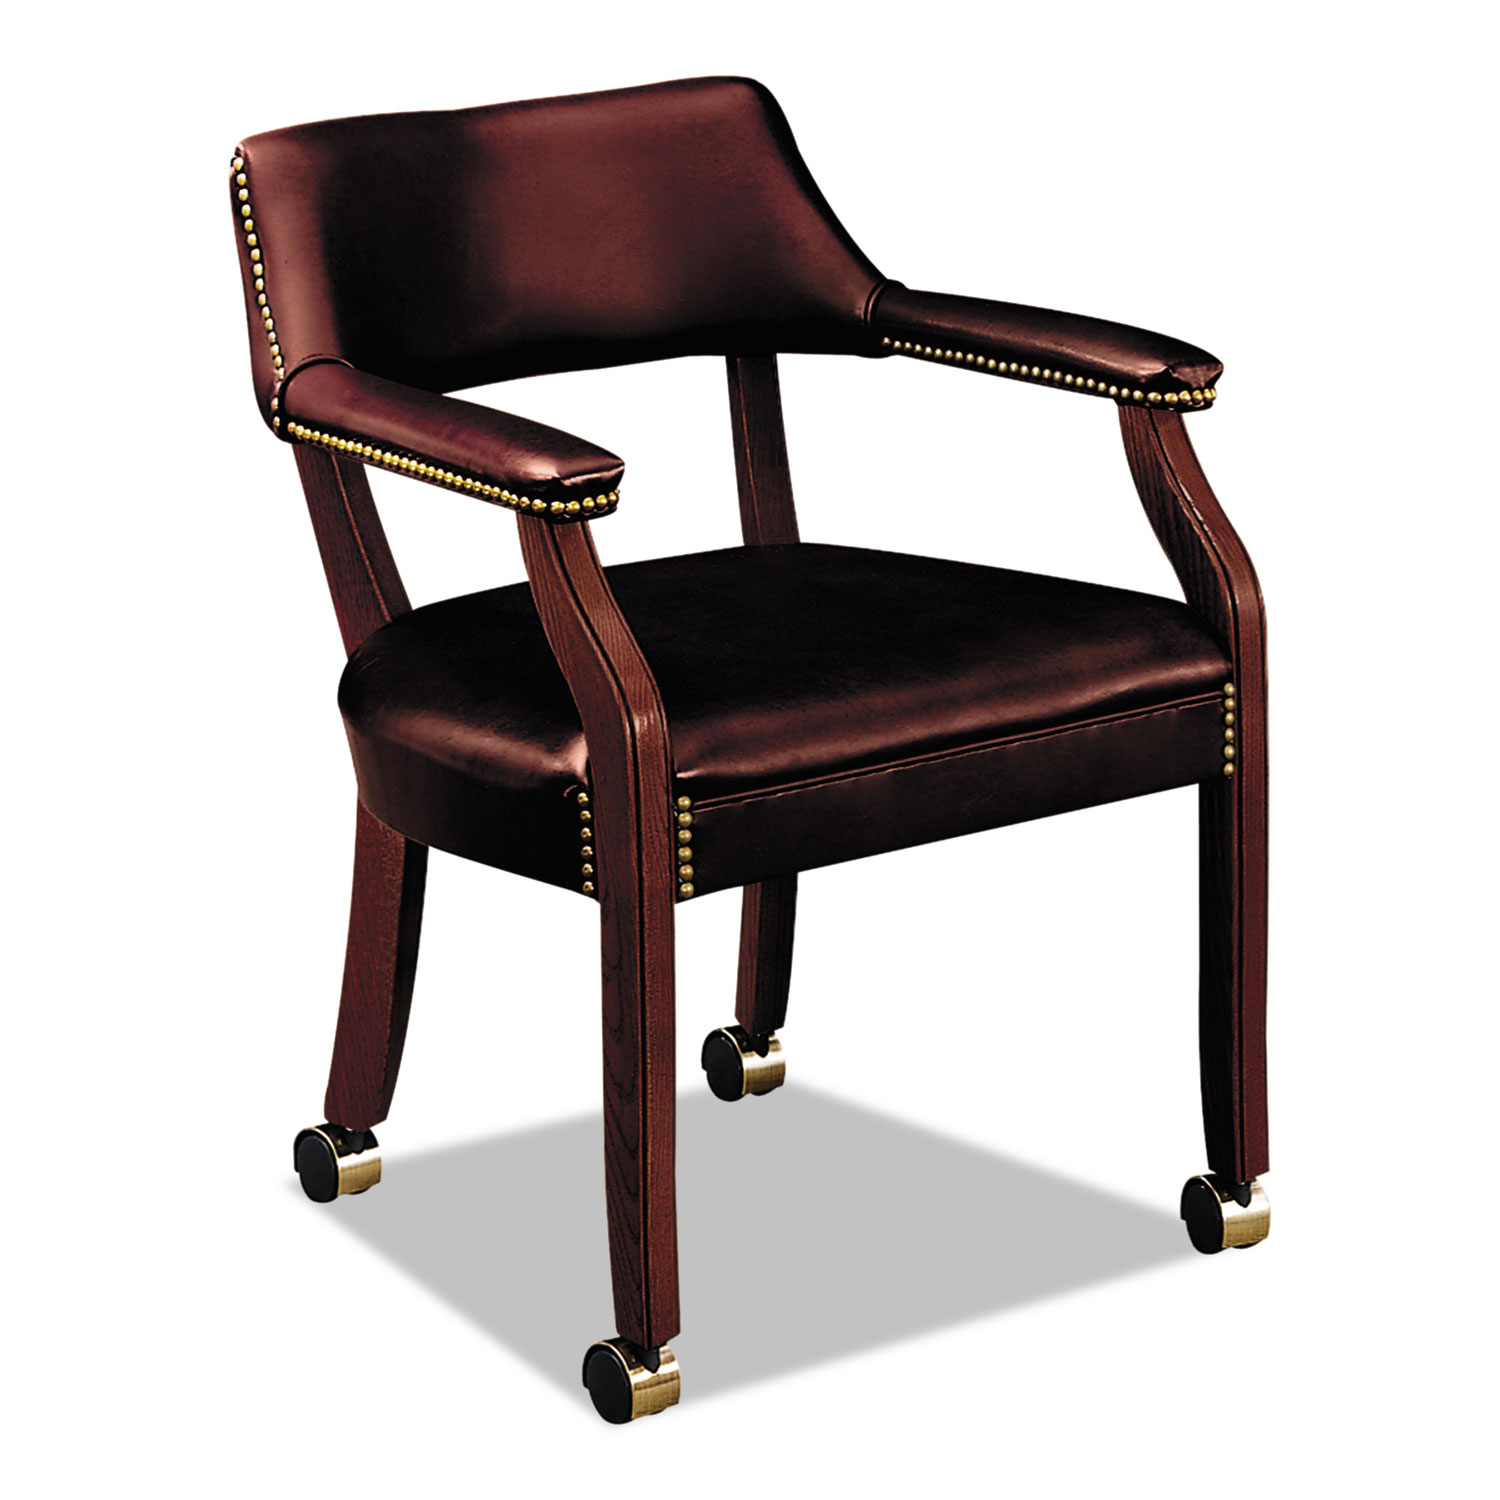 6550 Series Guest Arm Chair with Casters, Mahongany/Oxblood Vinyl Upholstery